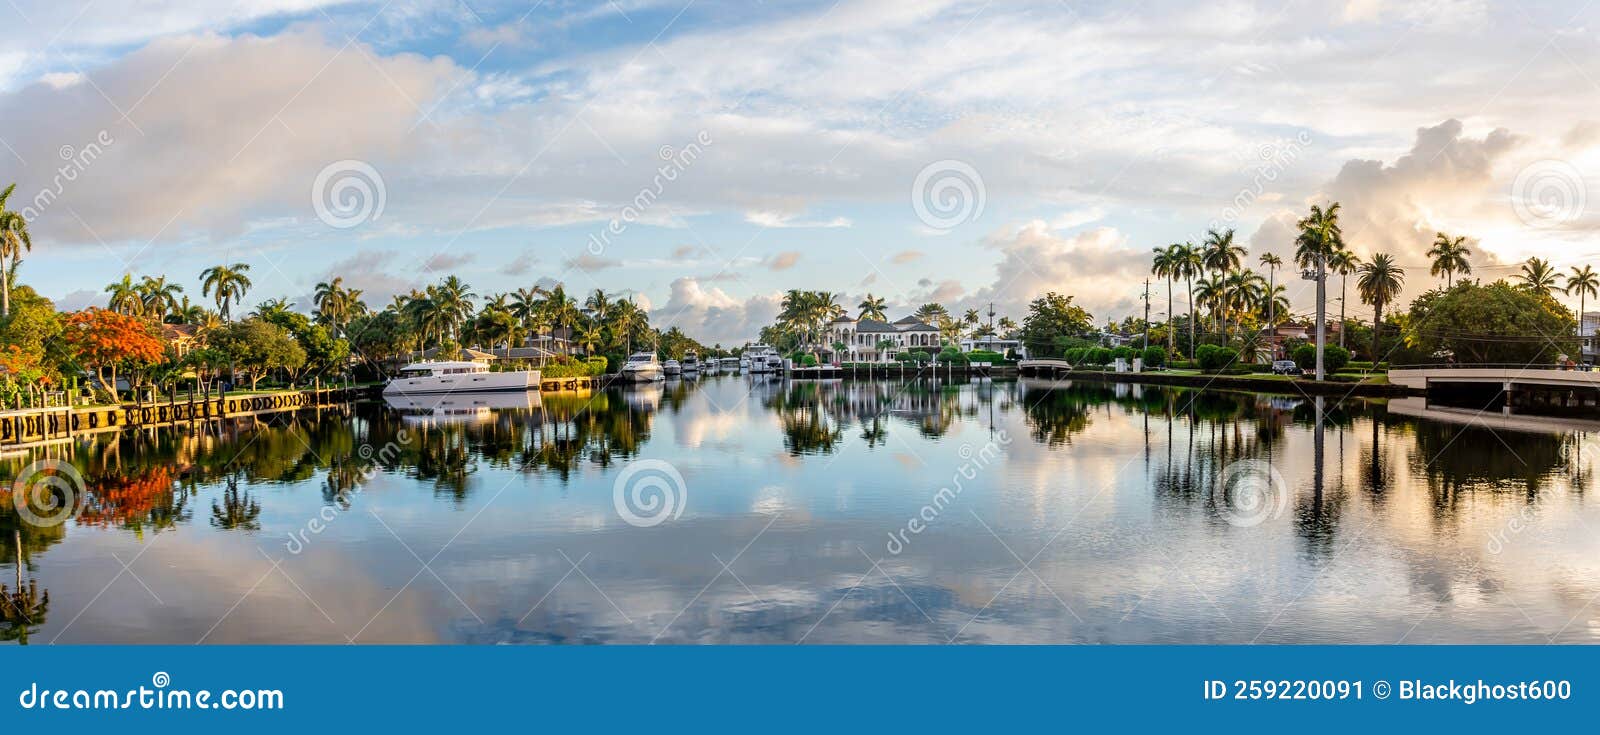 panoramic view of boats and luxury homes line the canals near las olas blvd. in fort lauderdale florida